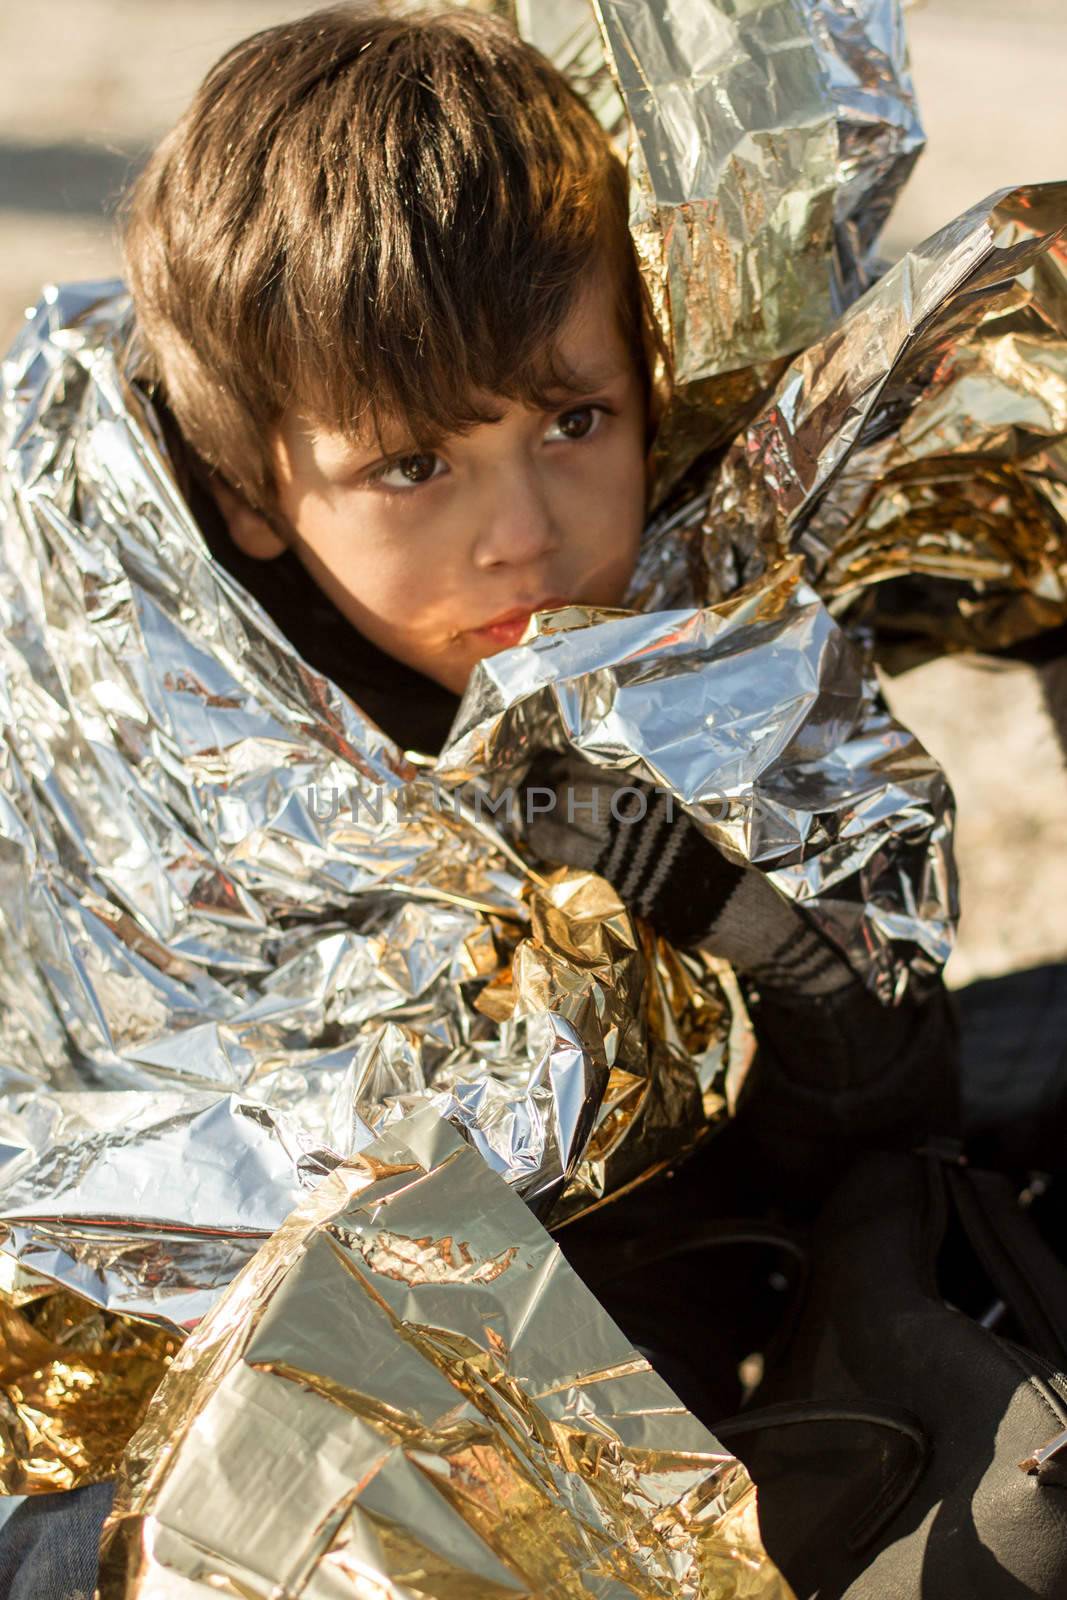 GREECE, Lesbos: A refugee child is wrapped in a heat blanket on the Greek island of Lesbos on December 6, 2015.  Many of the boats and rafts continue to make the journey from Turkey to Greece each day as thousands flee conflict in Iraq, Afghanistan, Syria and other countries. 